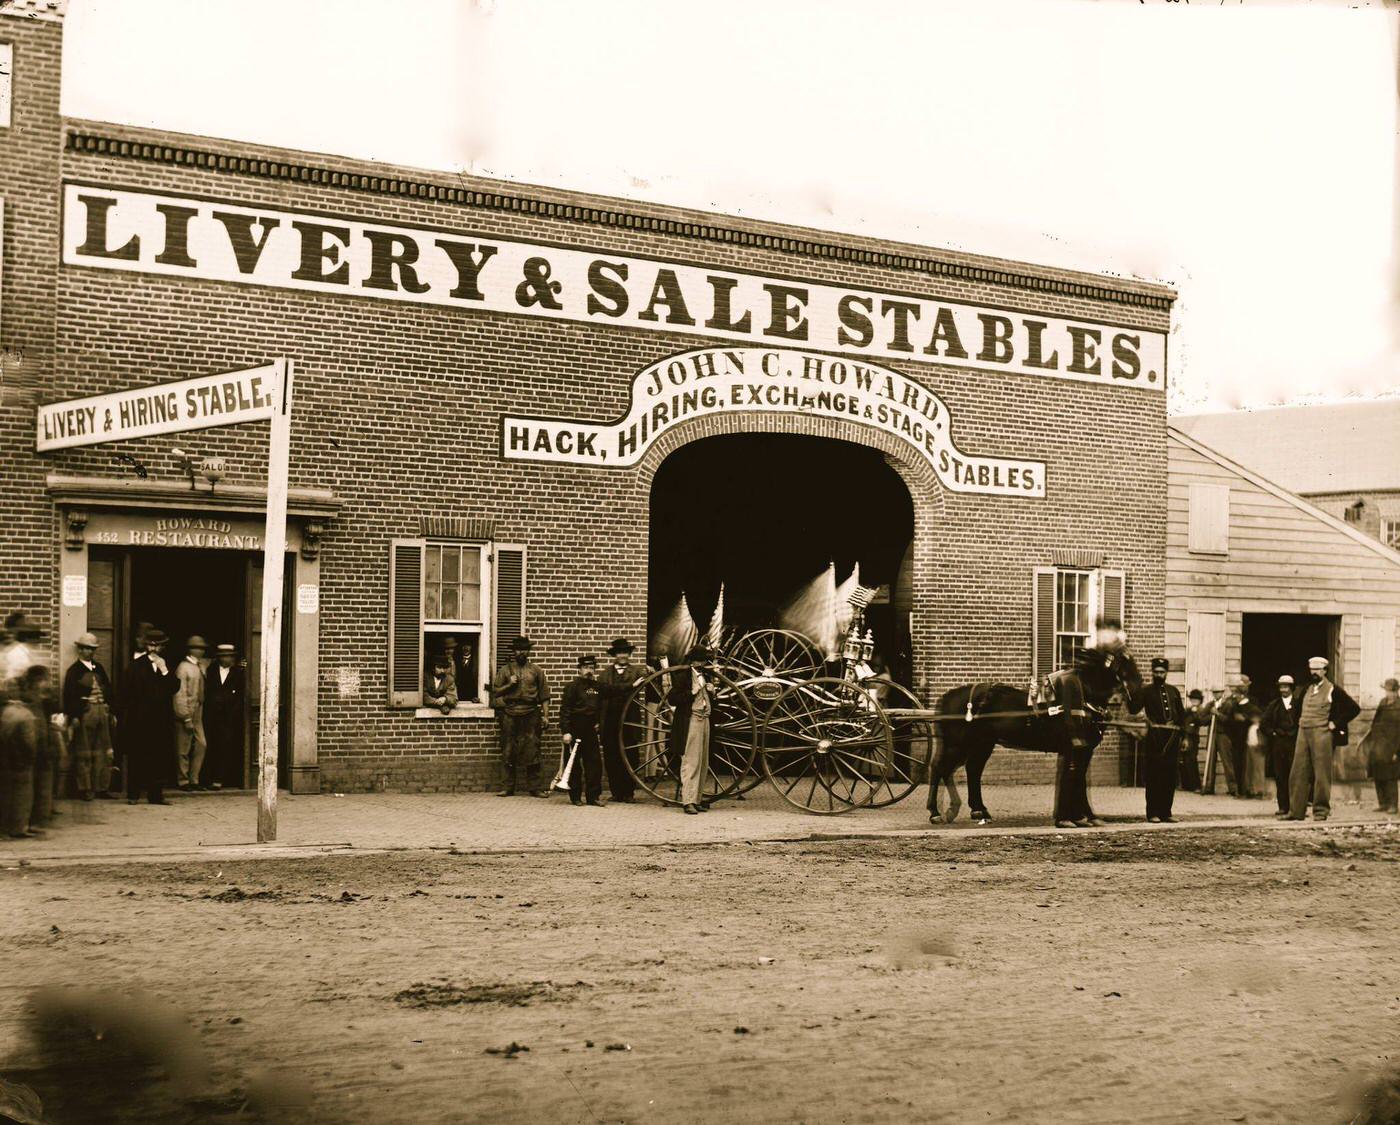 John C. Howard's stable on G Street between 6th and 7th, 1865